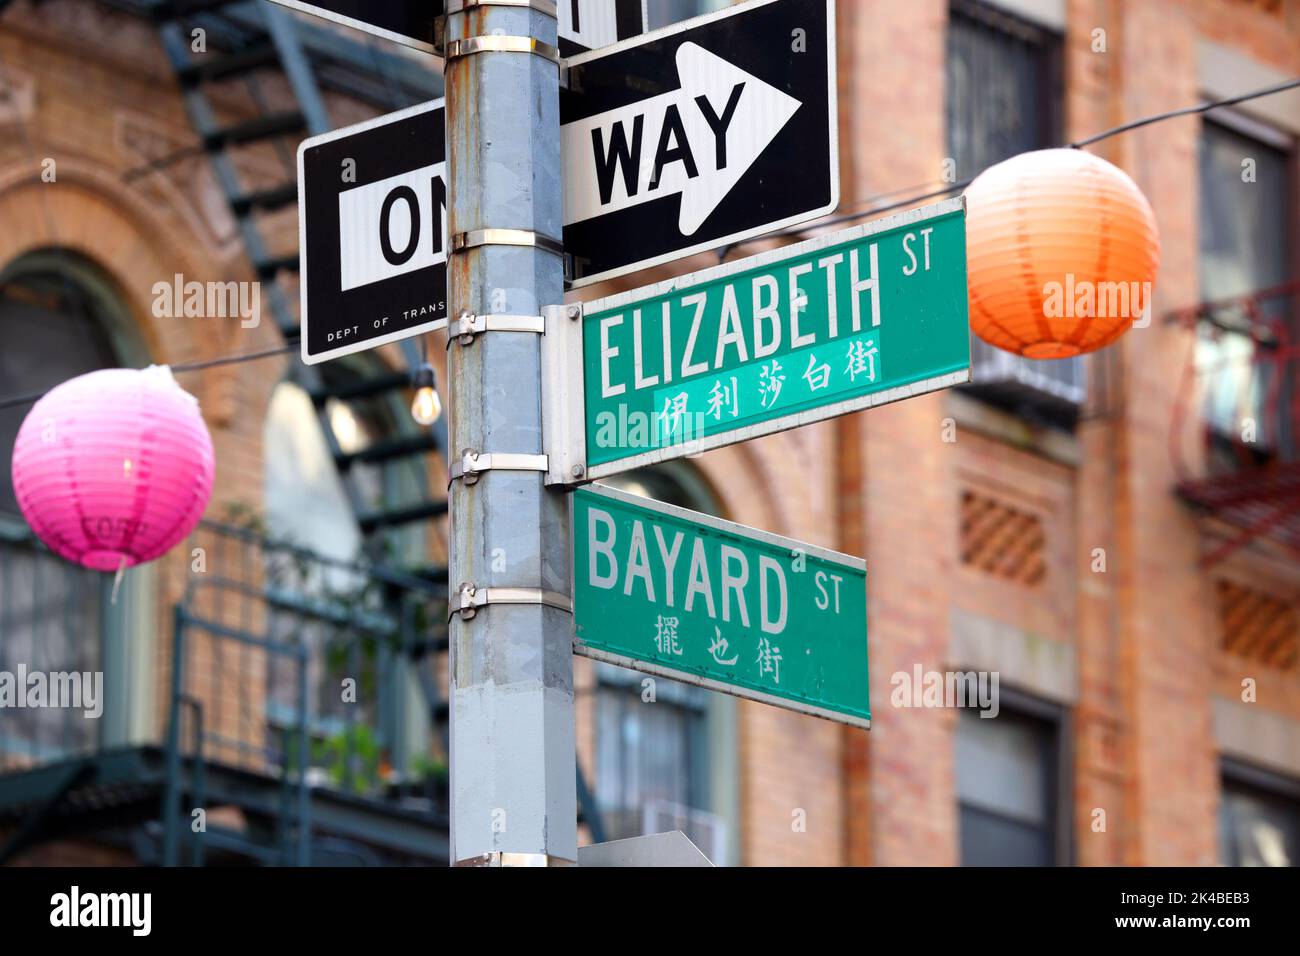 NYC bilingual street signs Elizabeth St and Bayard St in Manhattan Chinatown, New York. The Chinese translation is phonetic. Stock Photo